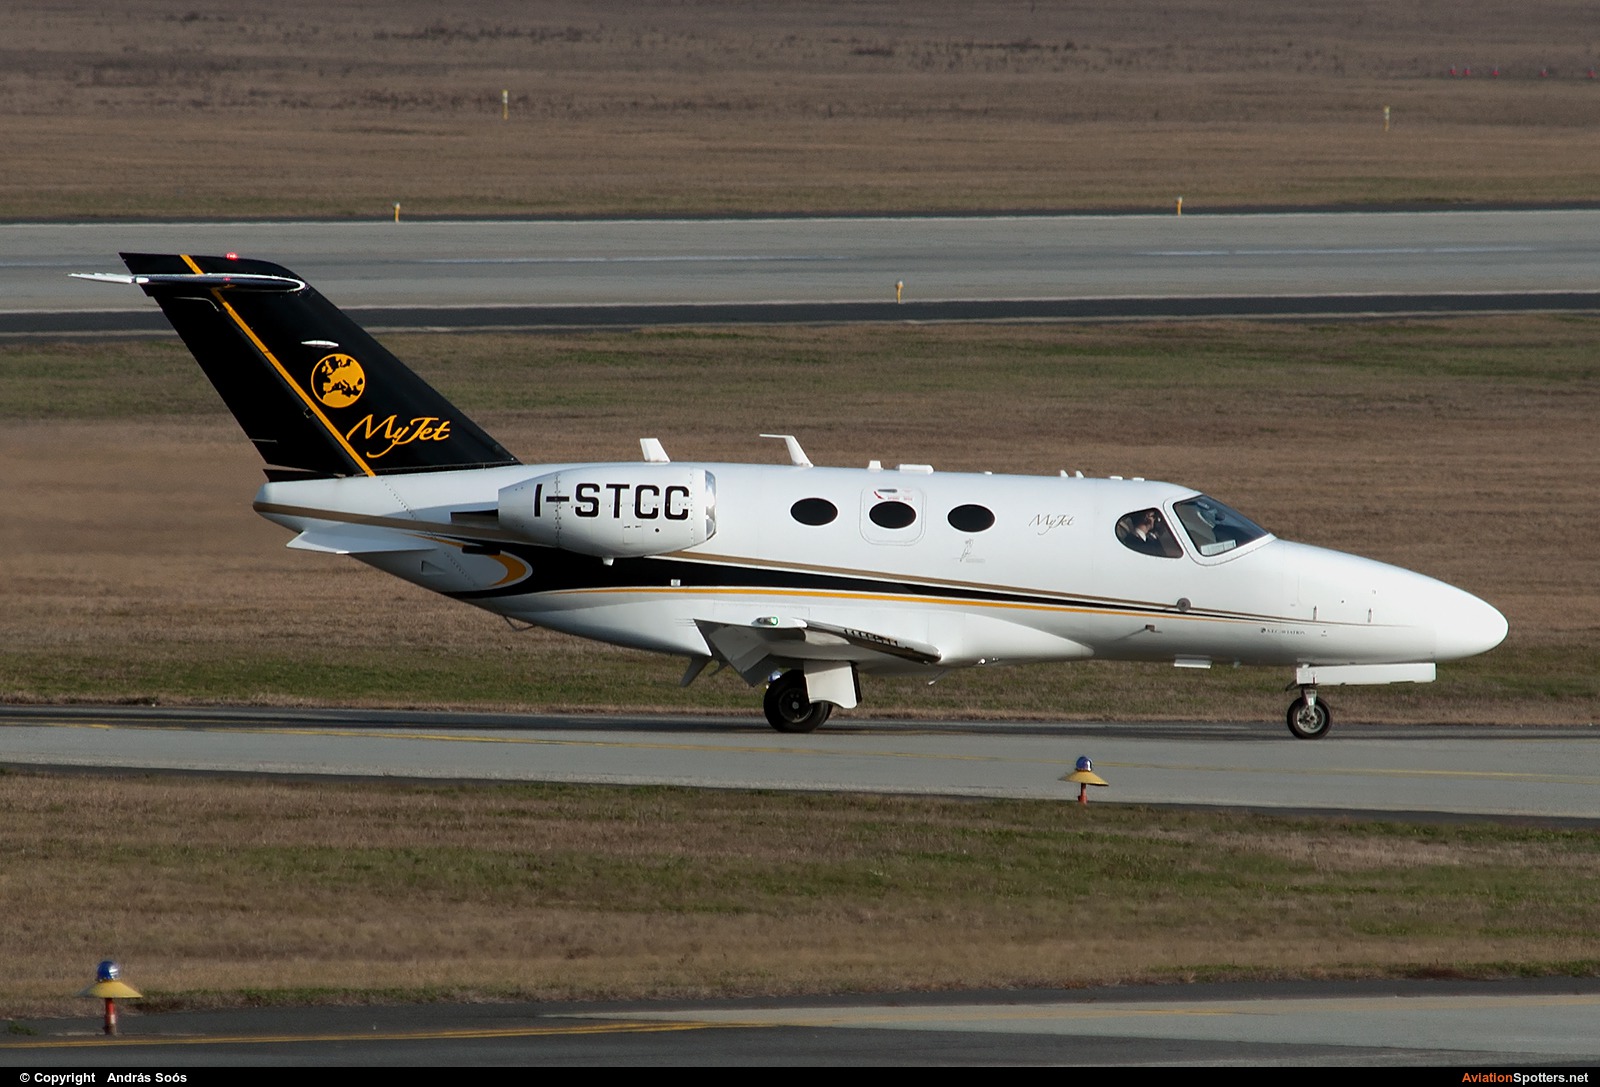 Private  -  510 Citation Mustang  (I-STCC) By András Soós (sas1965)